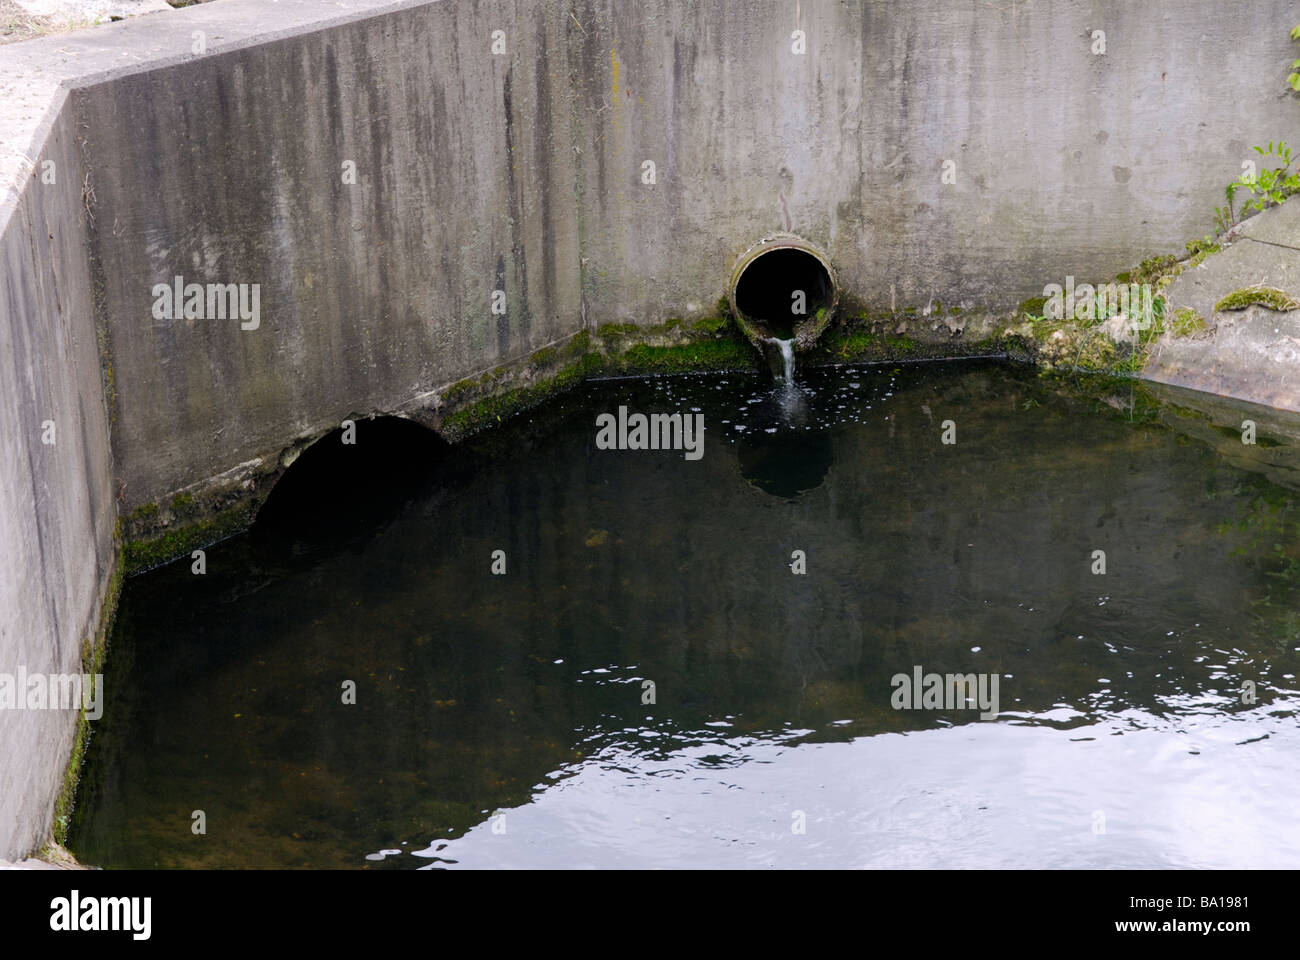 Outflow from a sewage treatment facility West Caldwell NJ Stock Photo